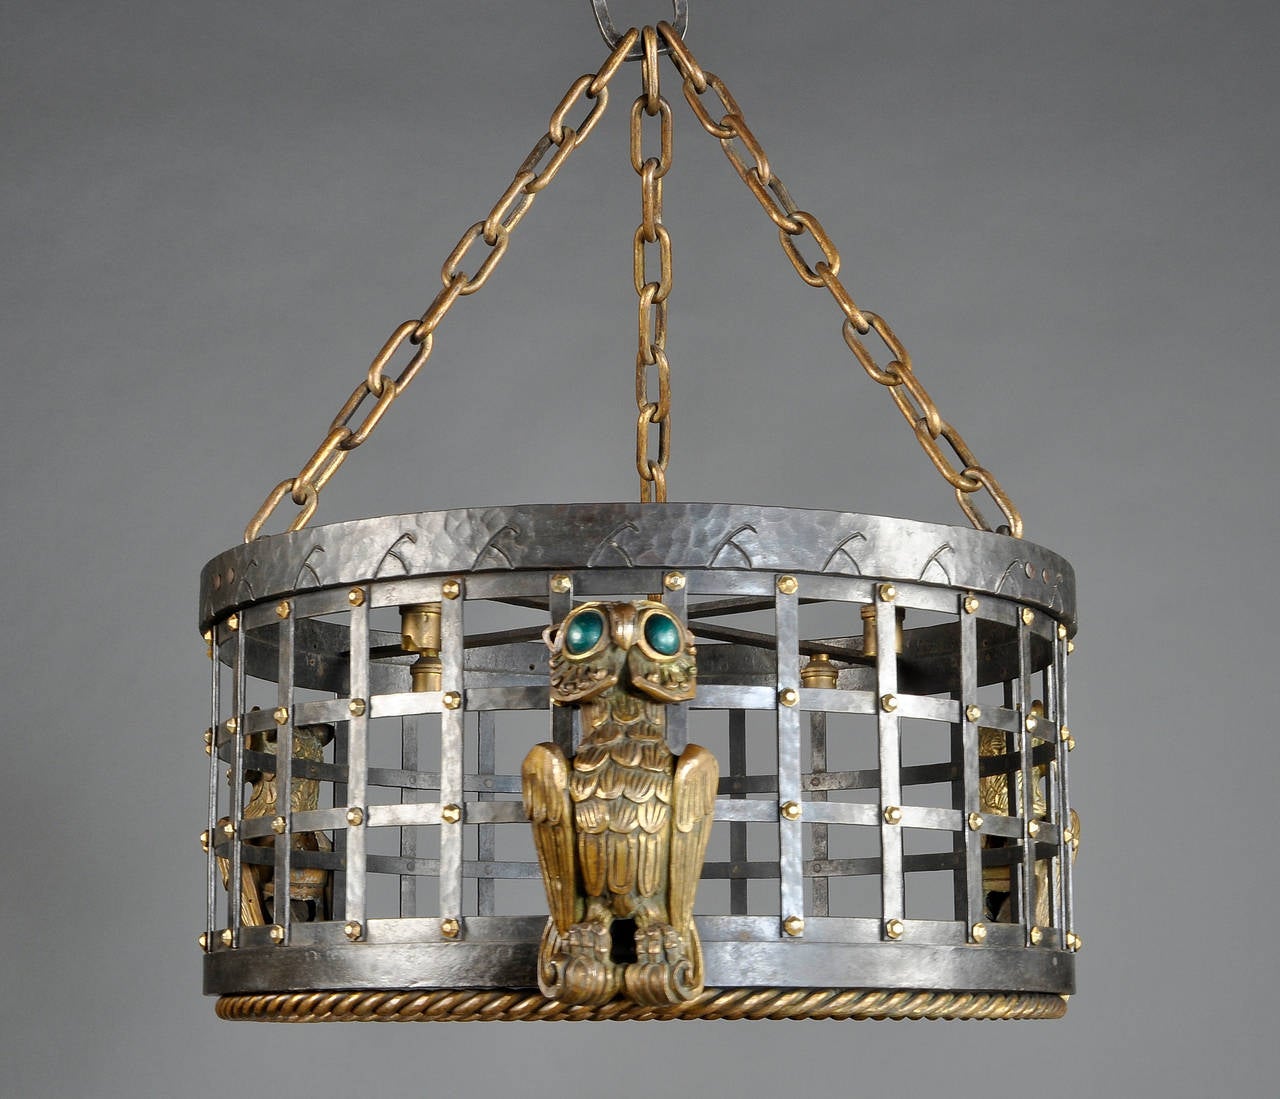 Adalbert Szabo Rare Wrought Iron and Bronze Ceiling Light Circa 1925
The eyes of the owls are in painted wood.
Wrought Iron and bronze parts in perfect condition, the piece is sold with its original silk witch is not in good condition